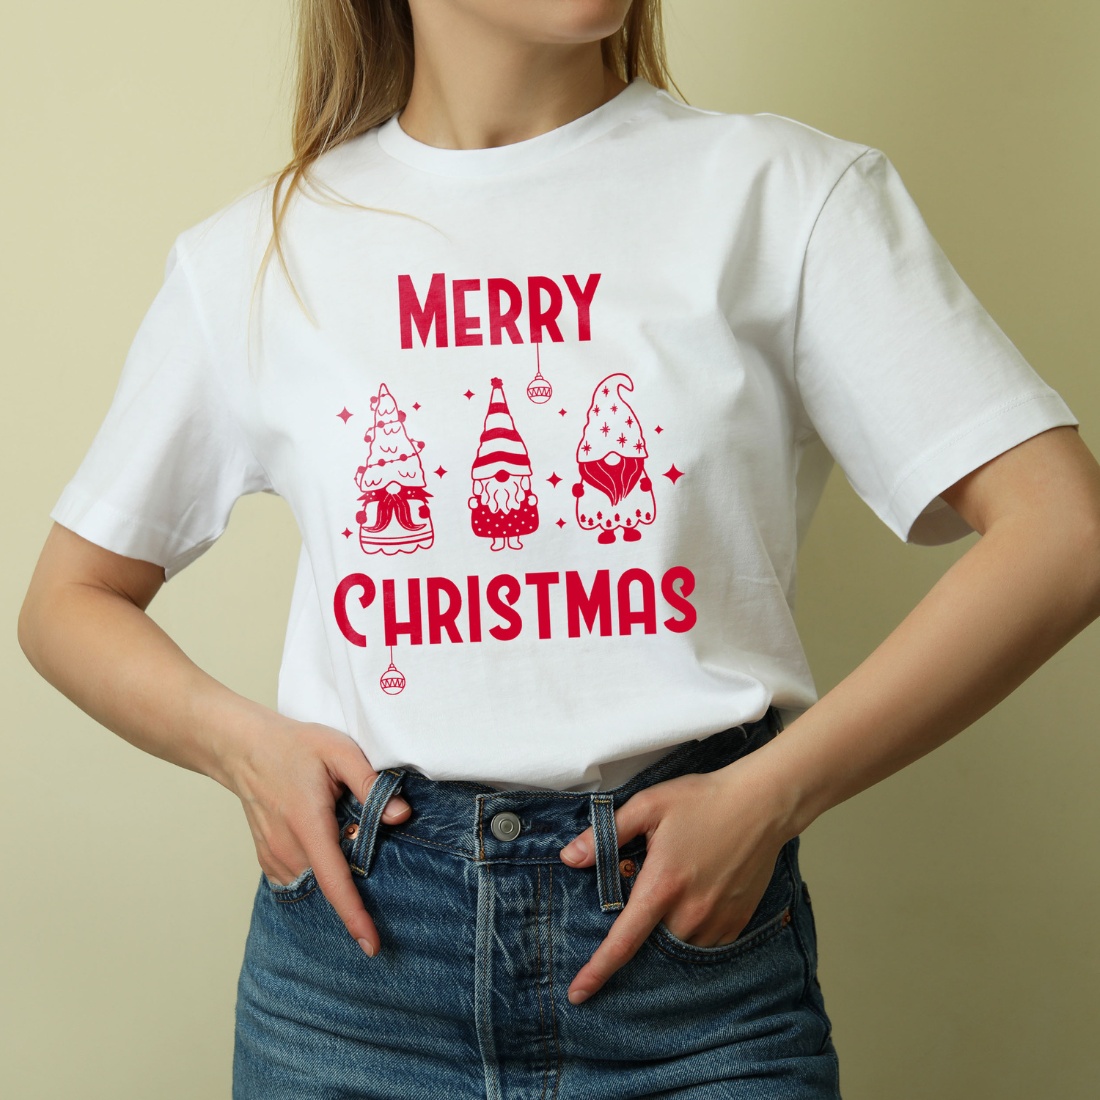 Merry Christmas SVG, Gnome Merry Christmas Png, Gnome Cut files, Christmas Gnome Svg, Funny christmas Svg, Png Sublimation Cut Files Cricut, Fully Editable preview image.